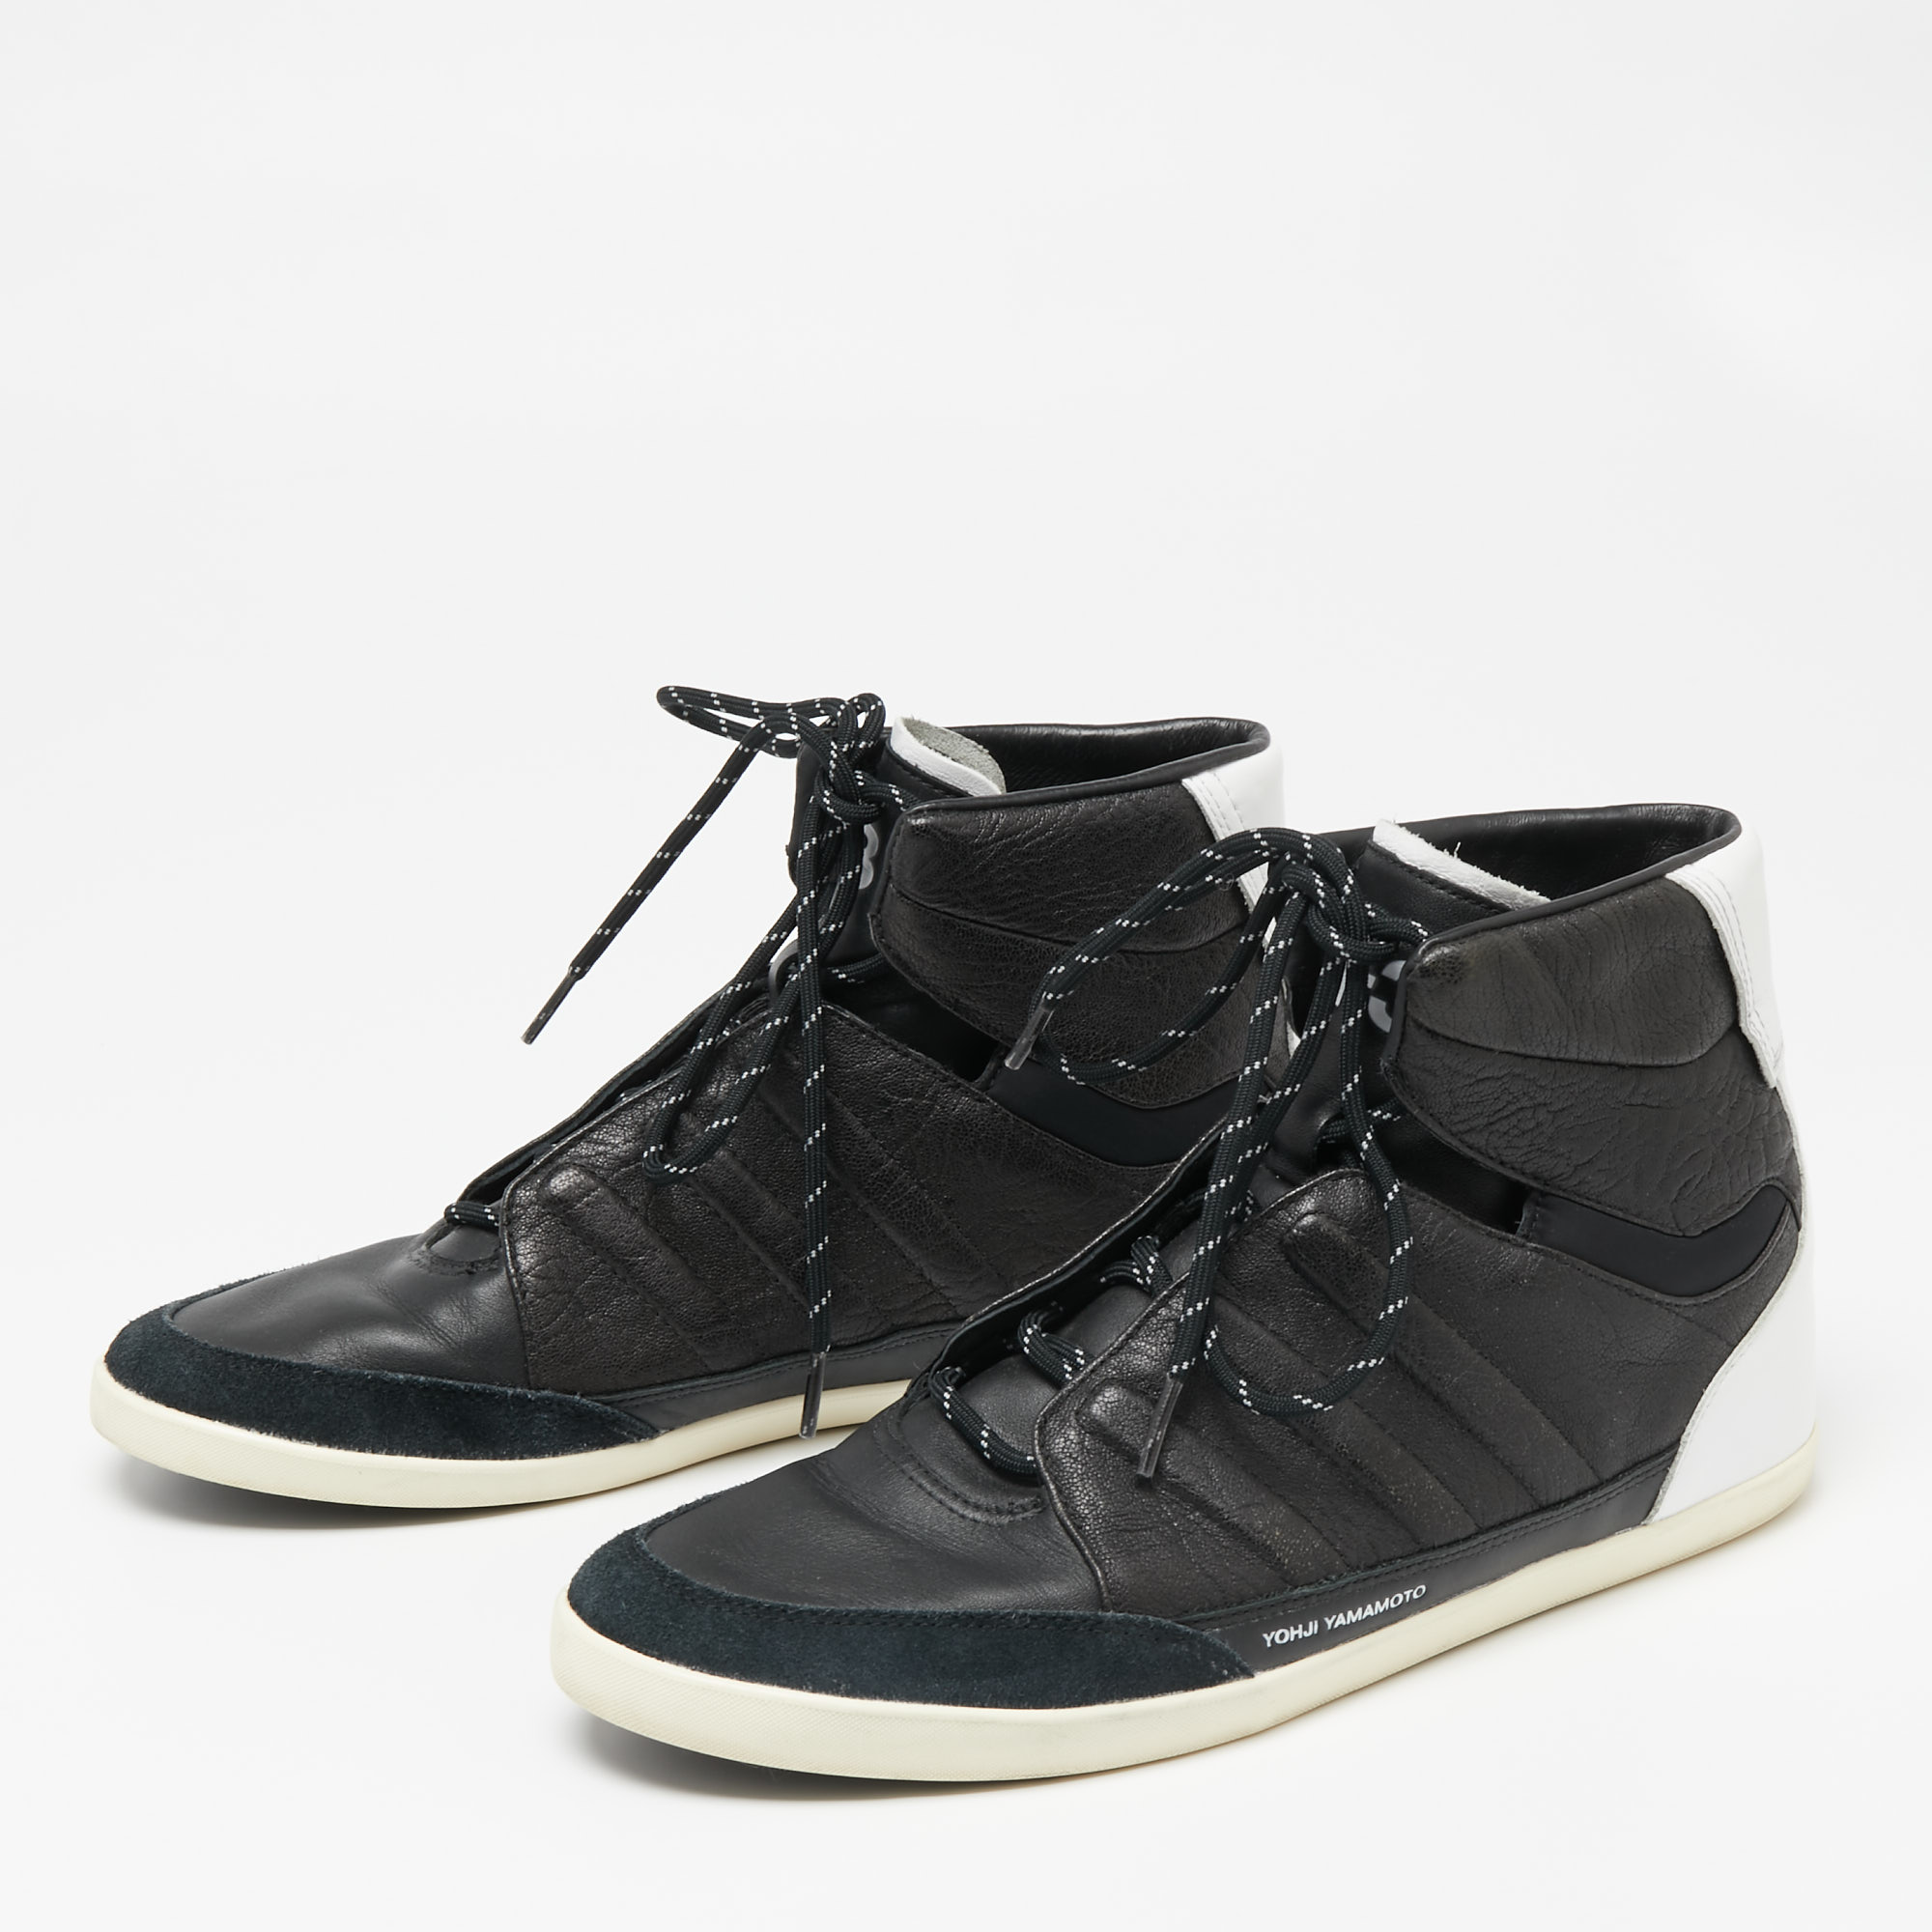 

Y-3 x adidas Yojhi Yamamoto Black/White Leather And Suede Honja High Top Sneakers Size 41 1/3